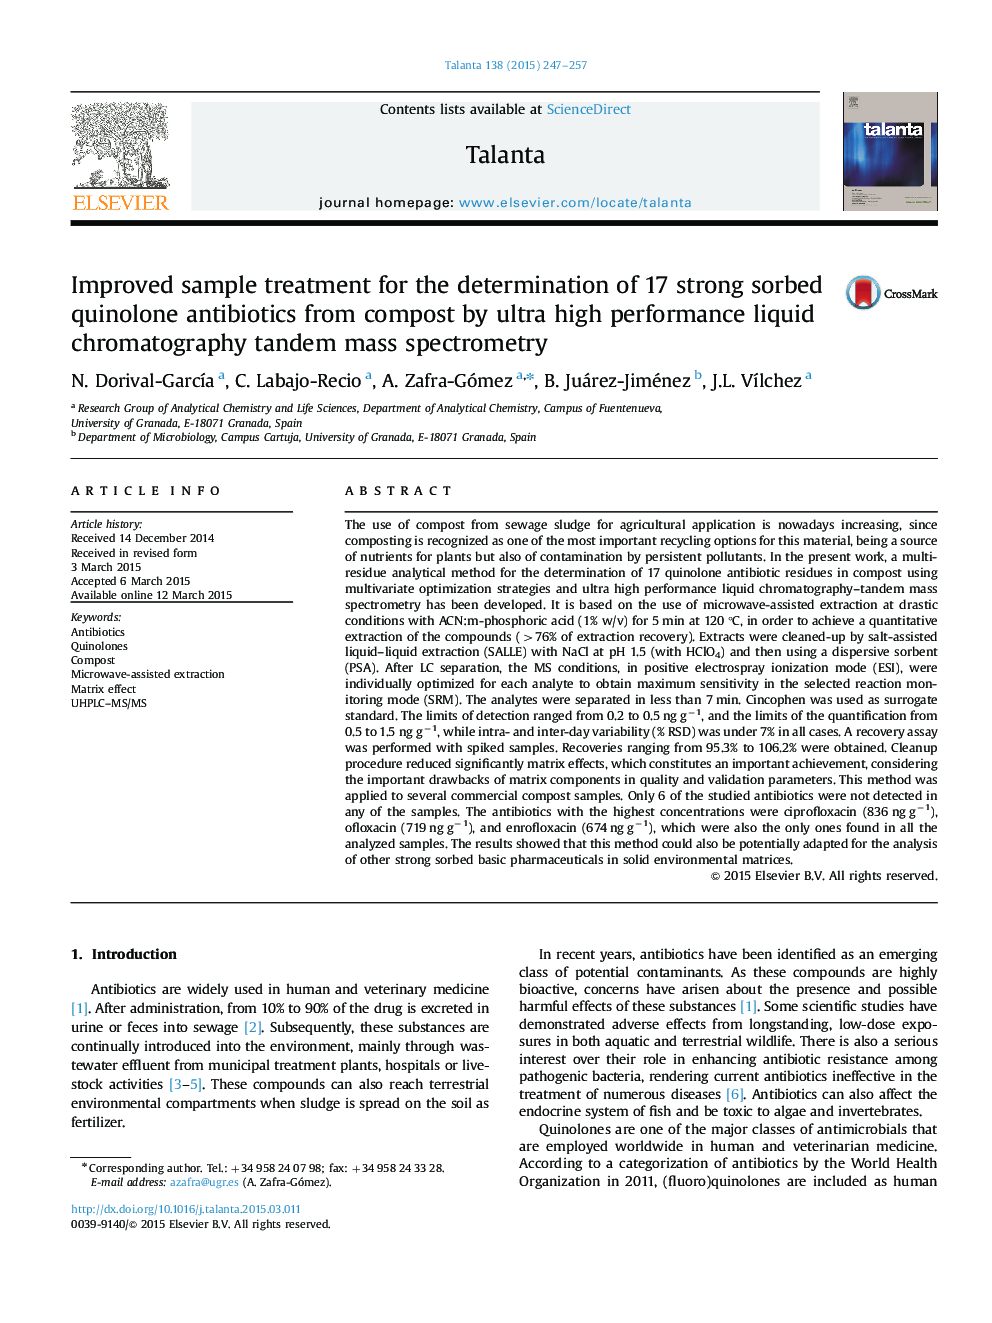 Improved sample treatment for the determination of 17 strong sorbed quinolone antibiotics from compost by ultra high performance liquid chromatography tandem mass spectrometry